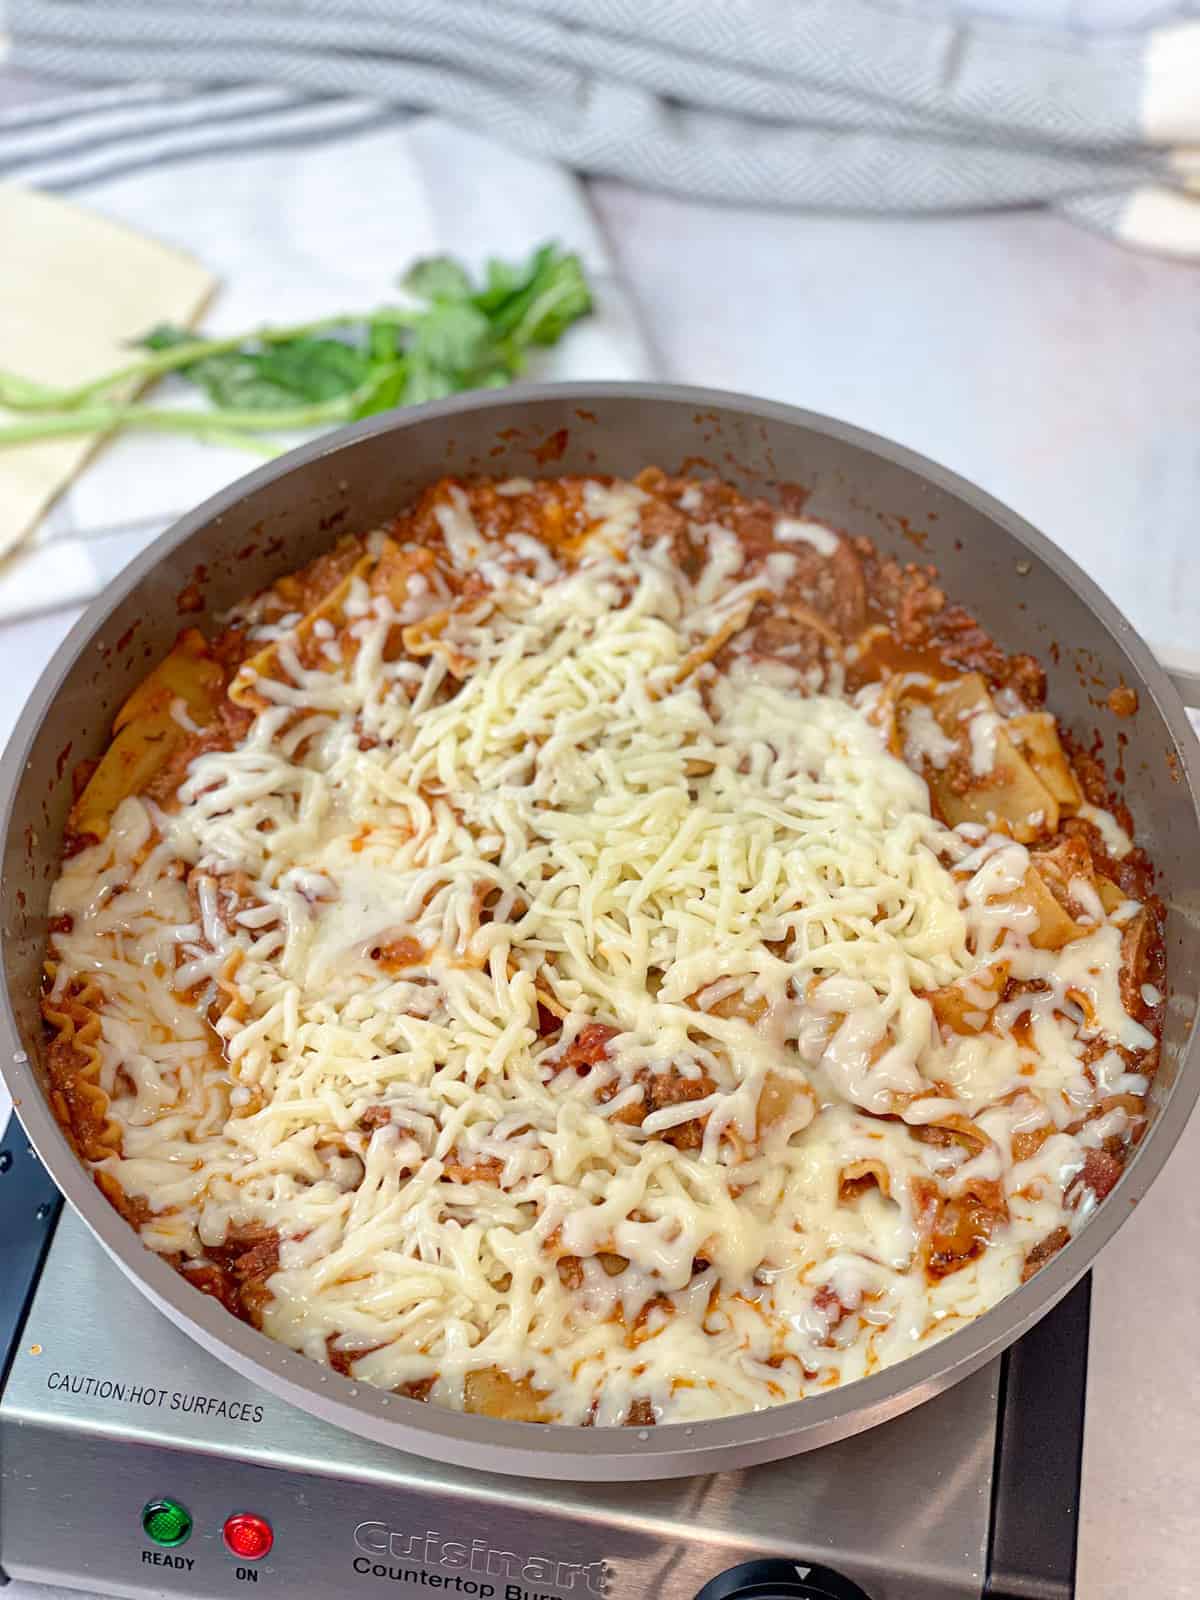 Mozzarella cheese is added to a cooking pan filled with red sauce and lasagna pasta.